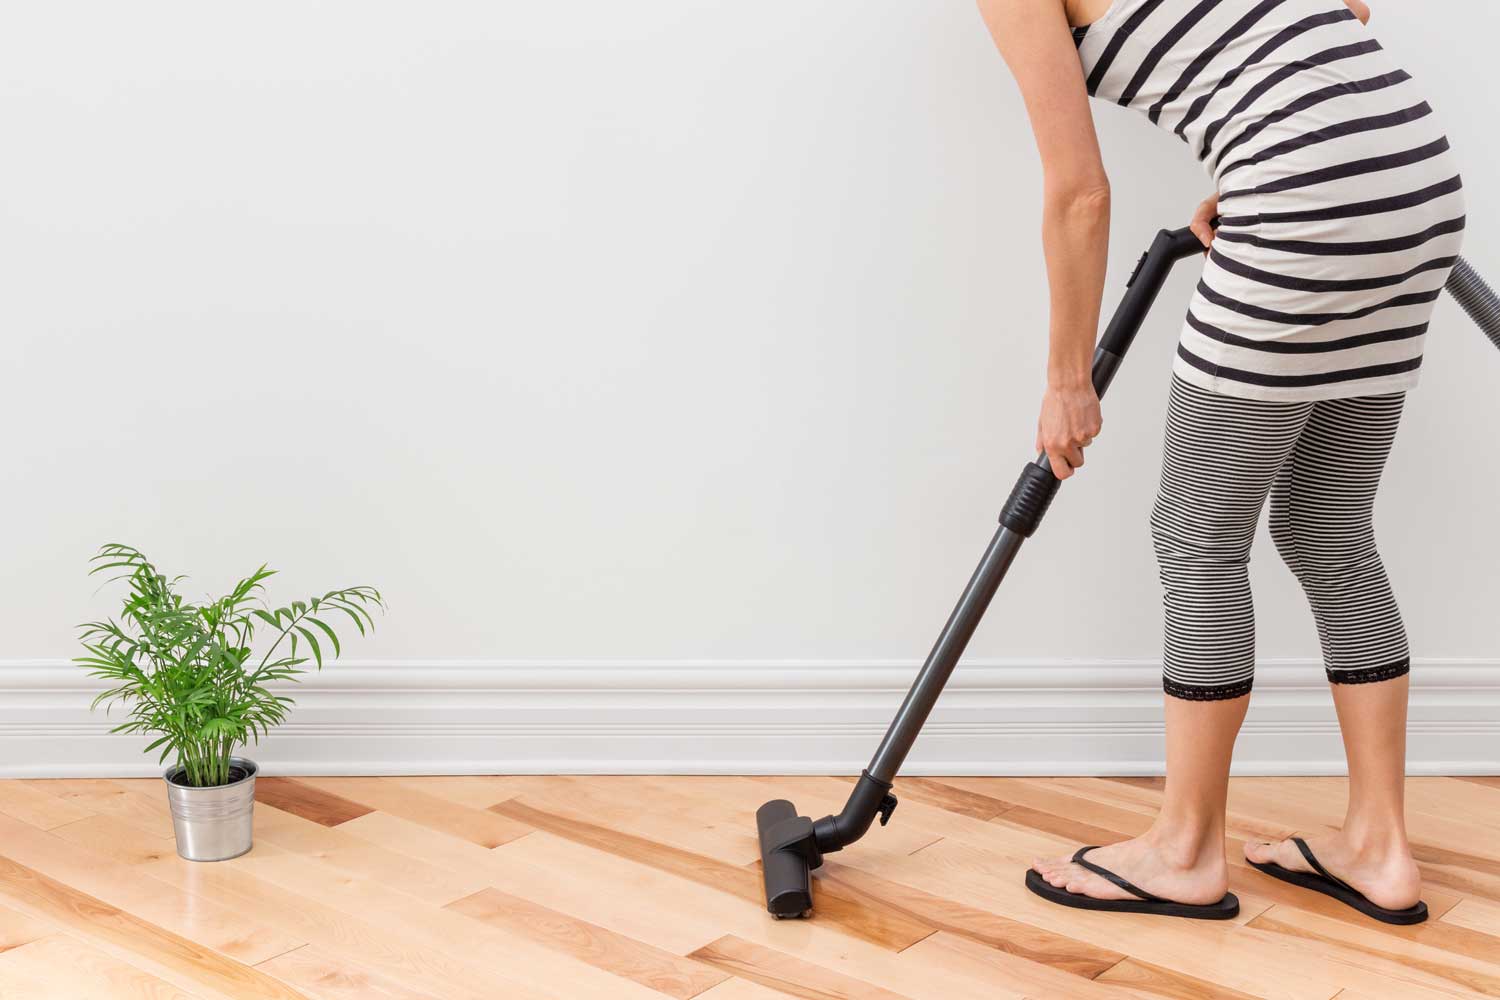 Regulary vacuum or sweep floors to remove dirt and keep your home floors looking amazing - tips from Footprints Floors in Colorado Springs.